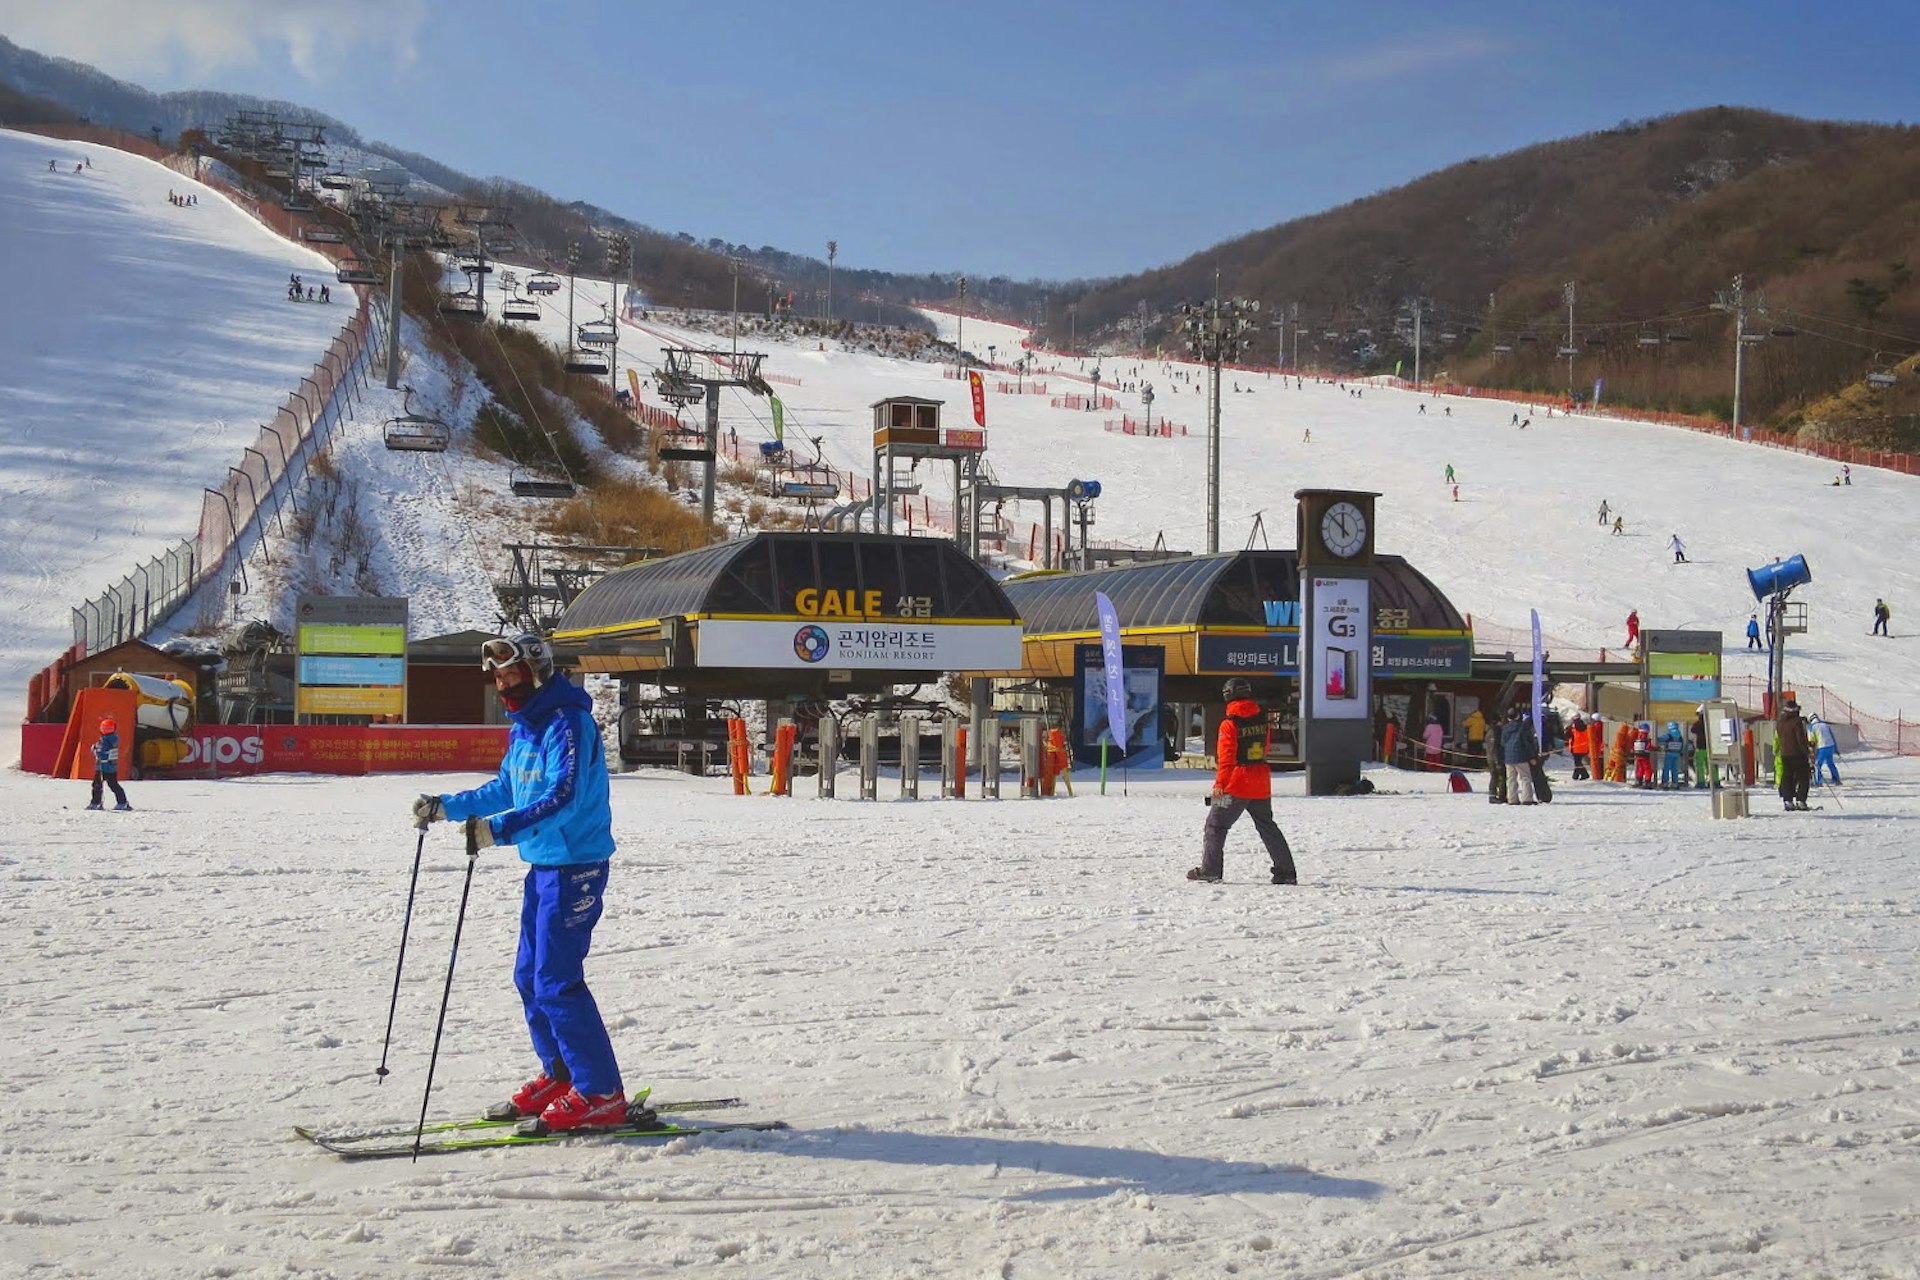 Konjiam, like many resorts, can be accessed as a day trip from Seoul. Image by Megan Eaves / Lonely Planet